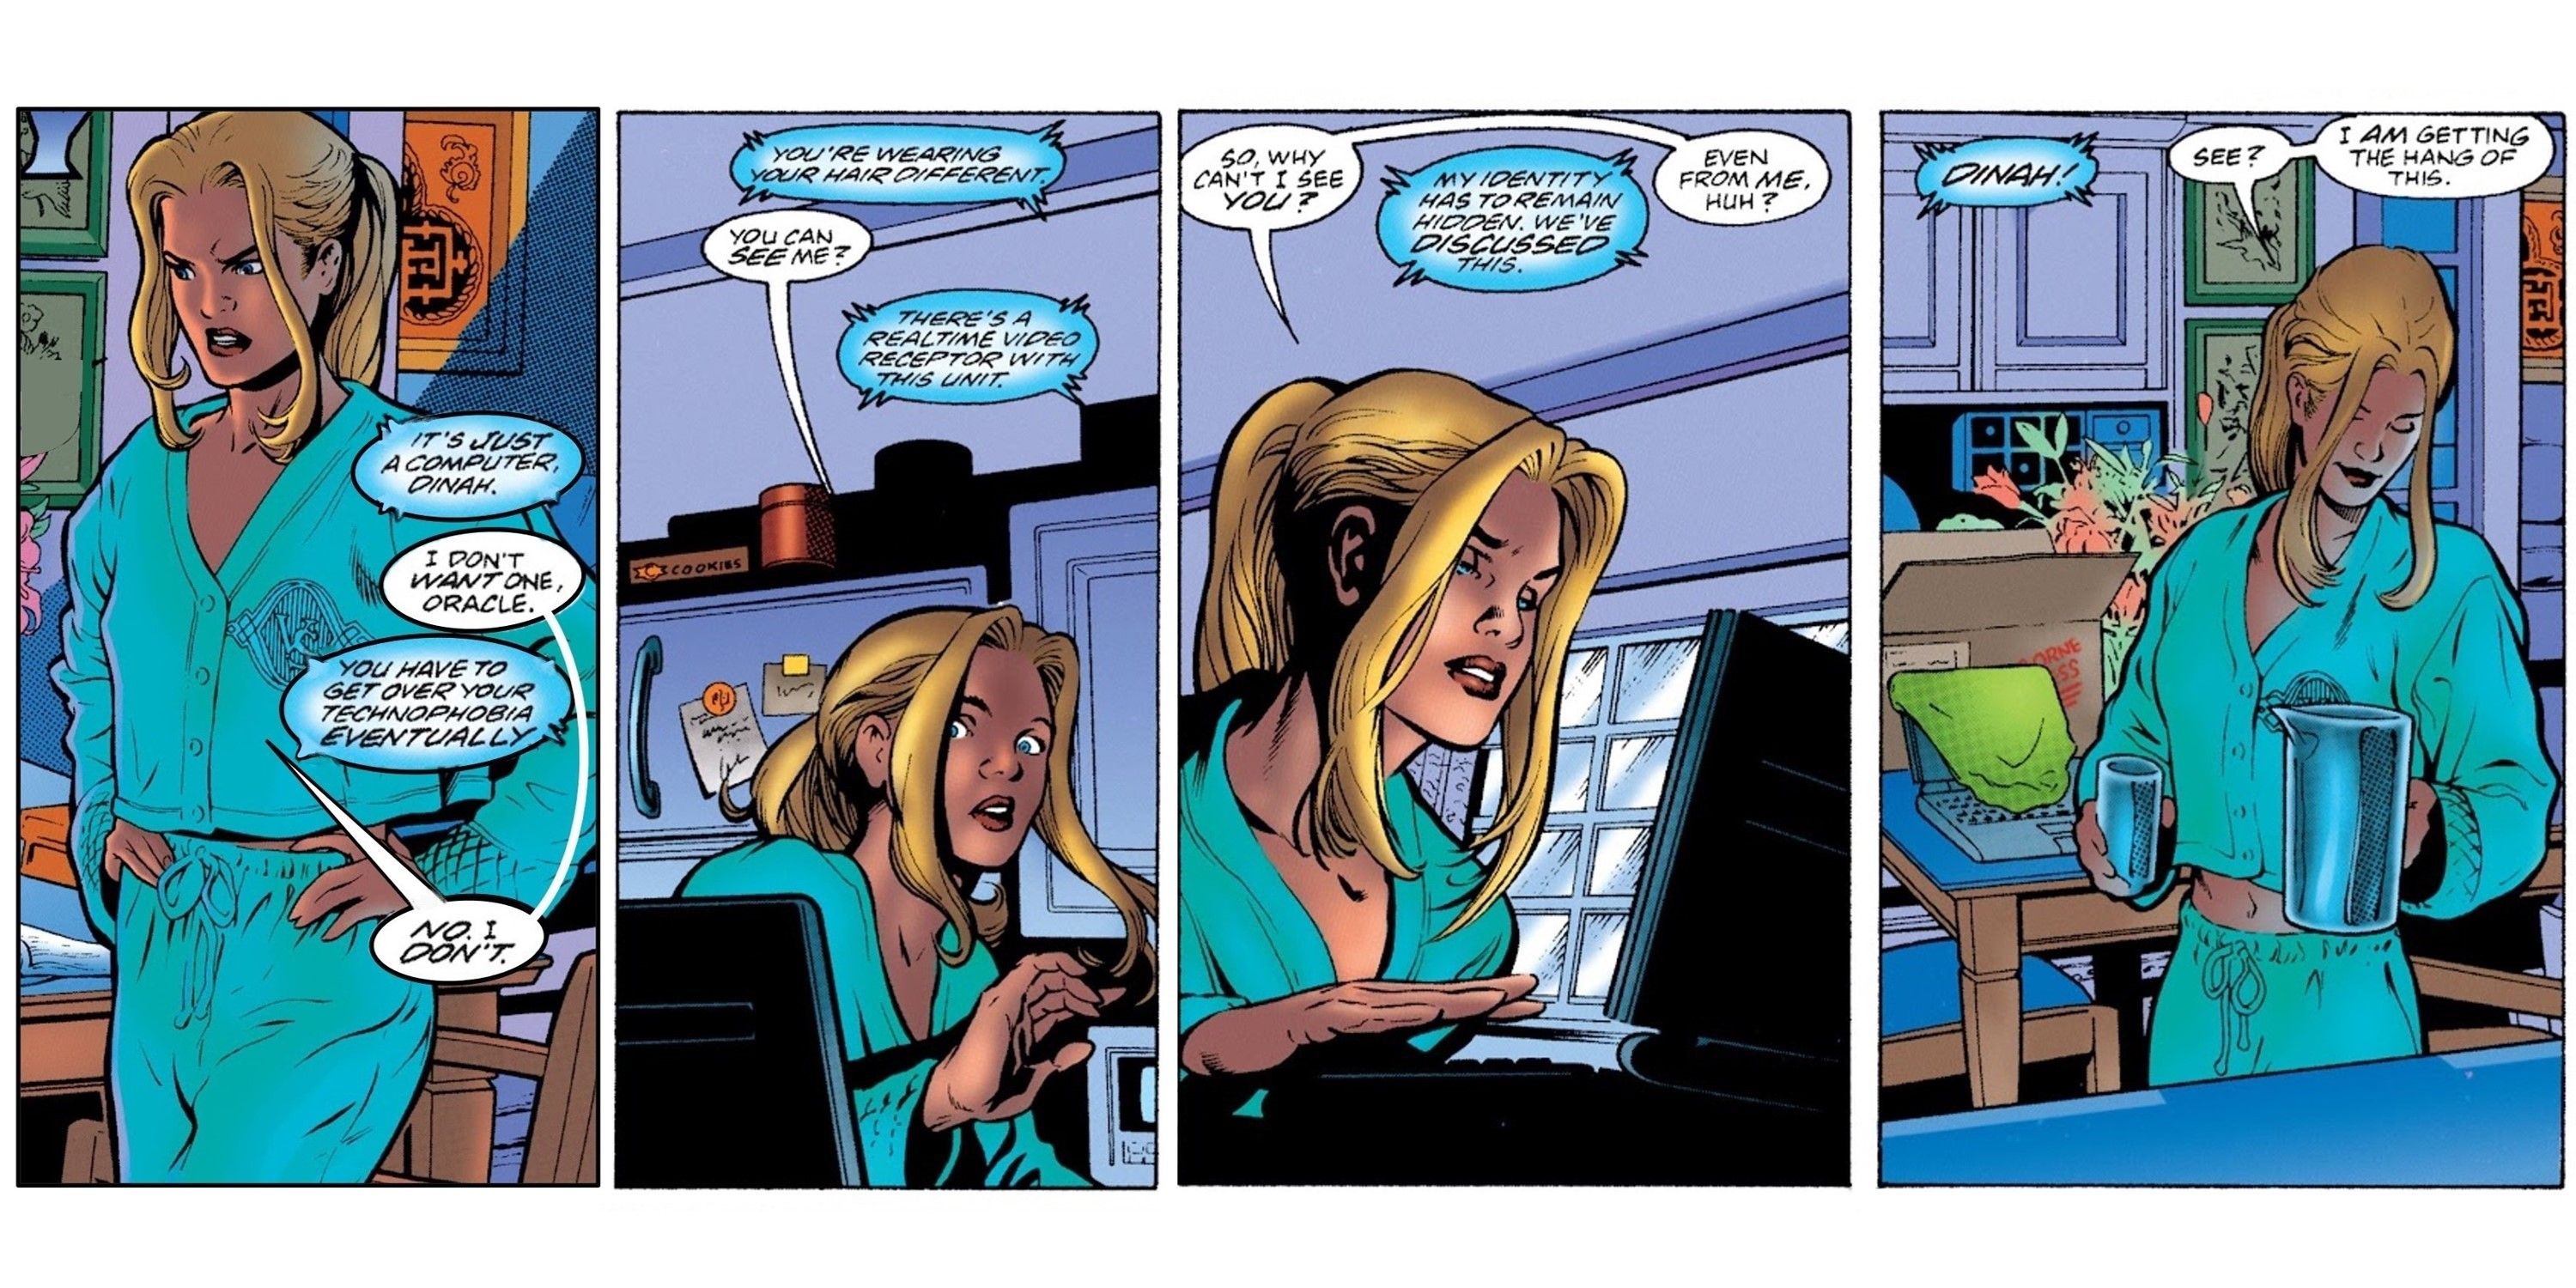 Black Canary covers her webcam to stop Oracle from watching her